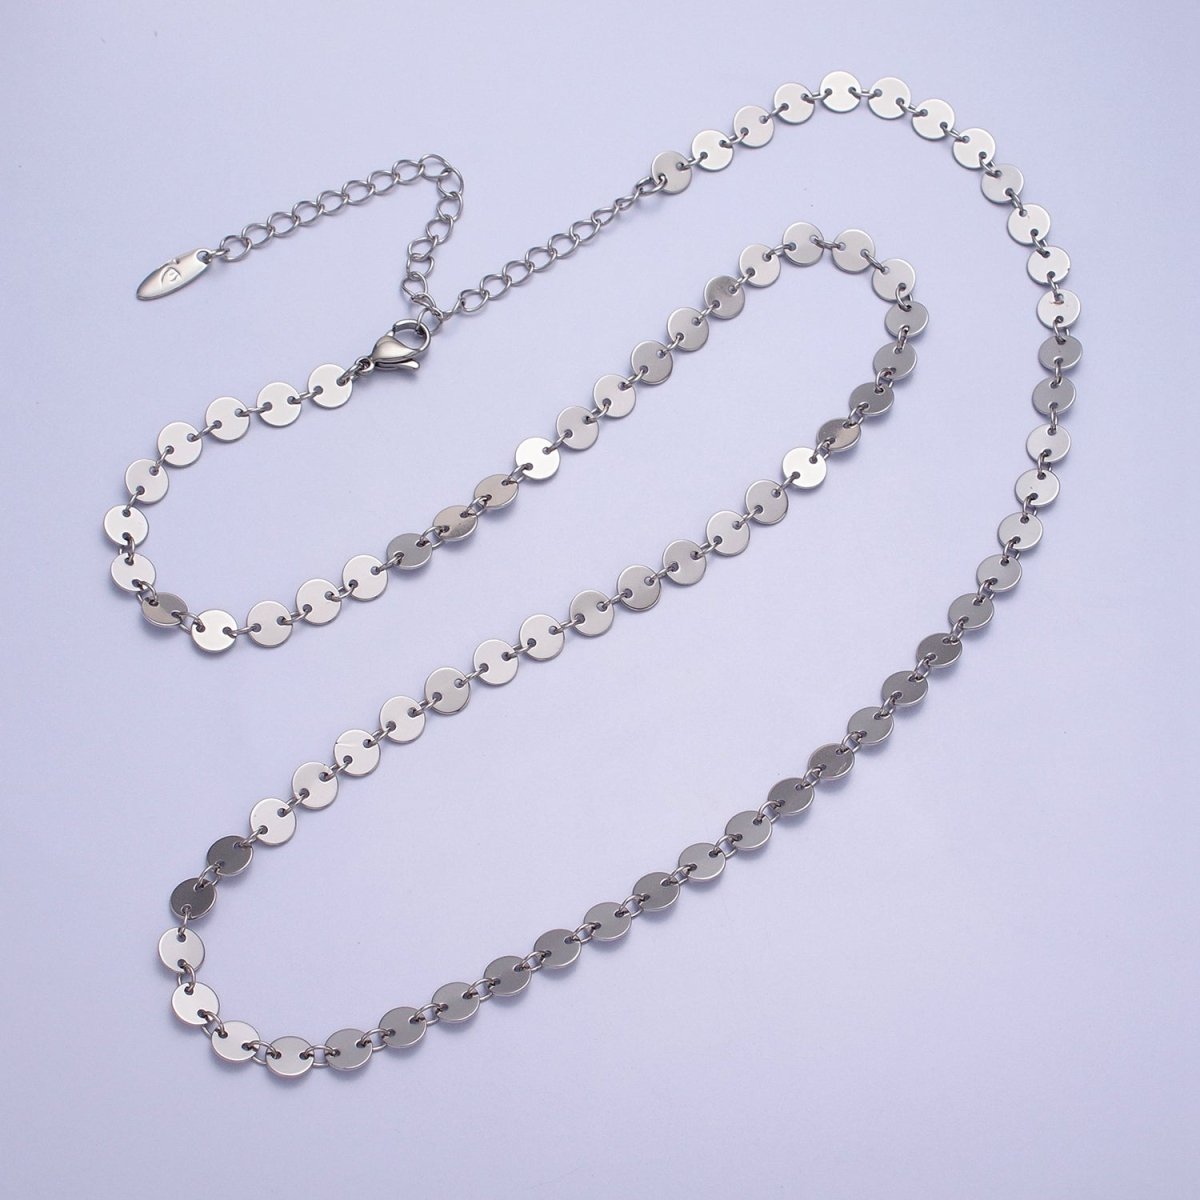 Silver SEQUIN Chain, 6mm Round Disk Disc Circle Disc Necklace Chain for Layer Jewelry Chain 23.75 inch Necklace Ready to Wear | WA-1600 Clearance Pricing - DLUXCA